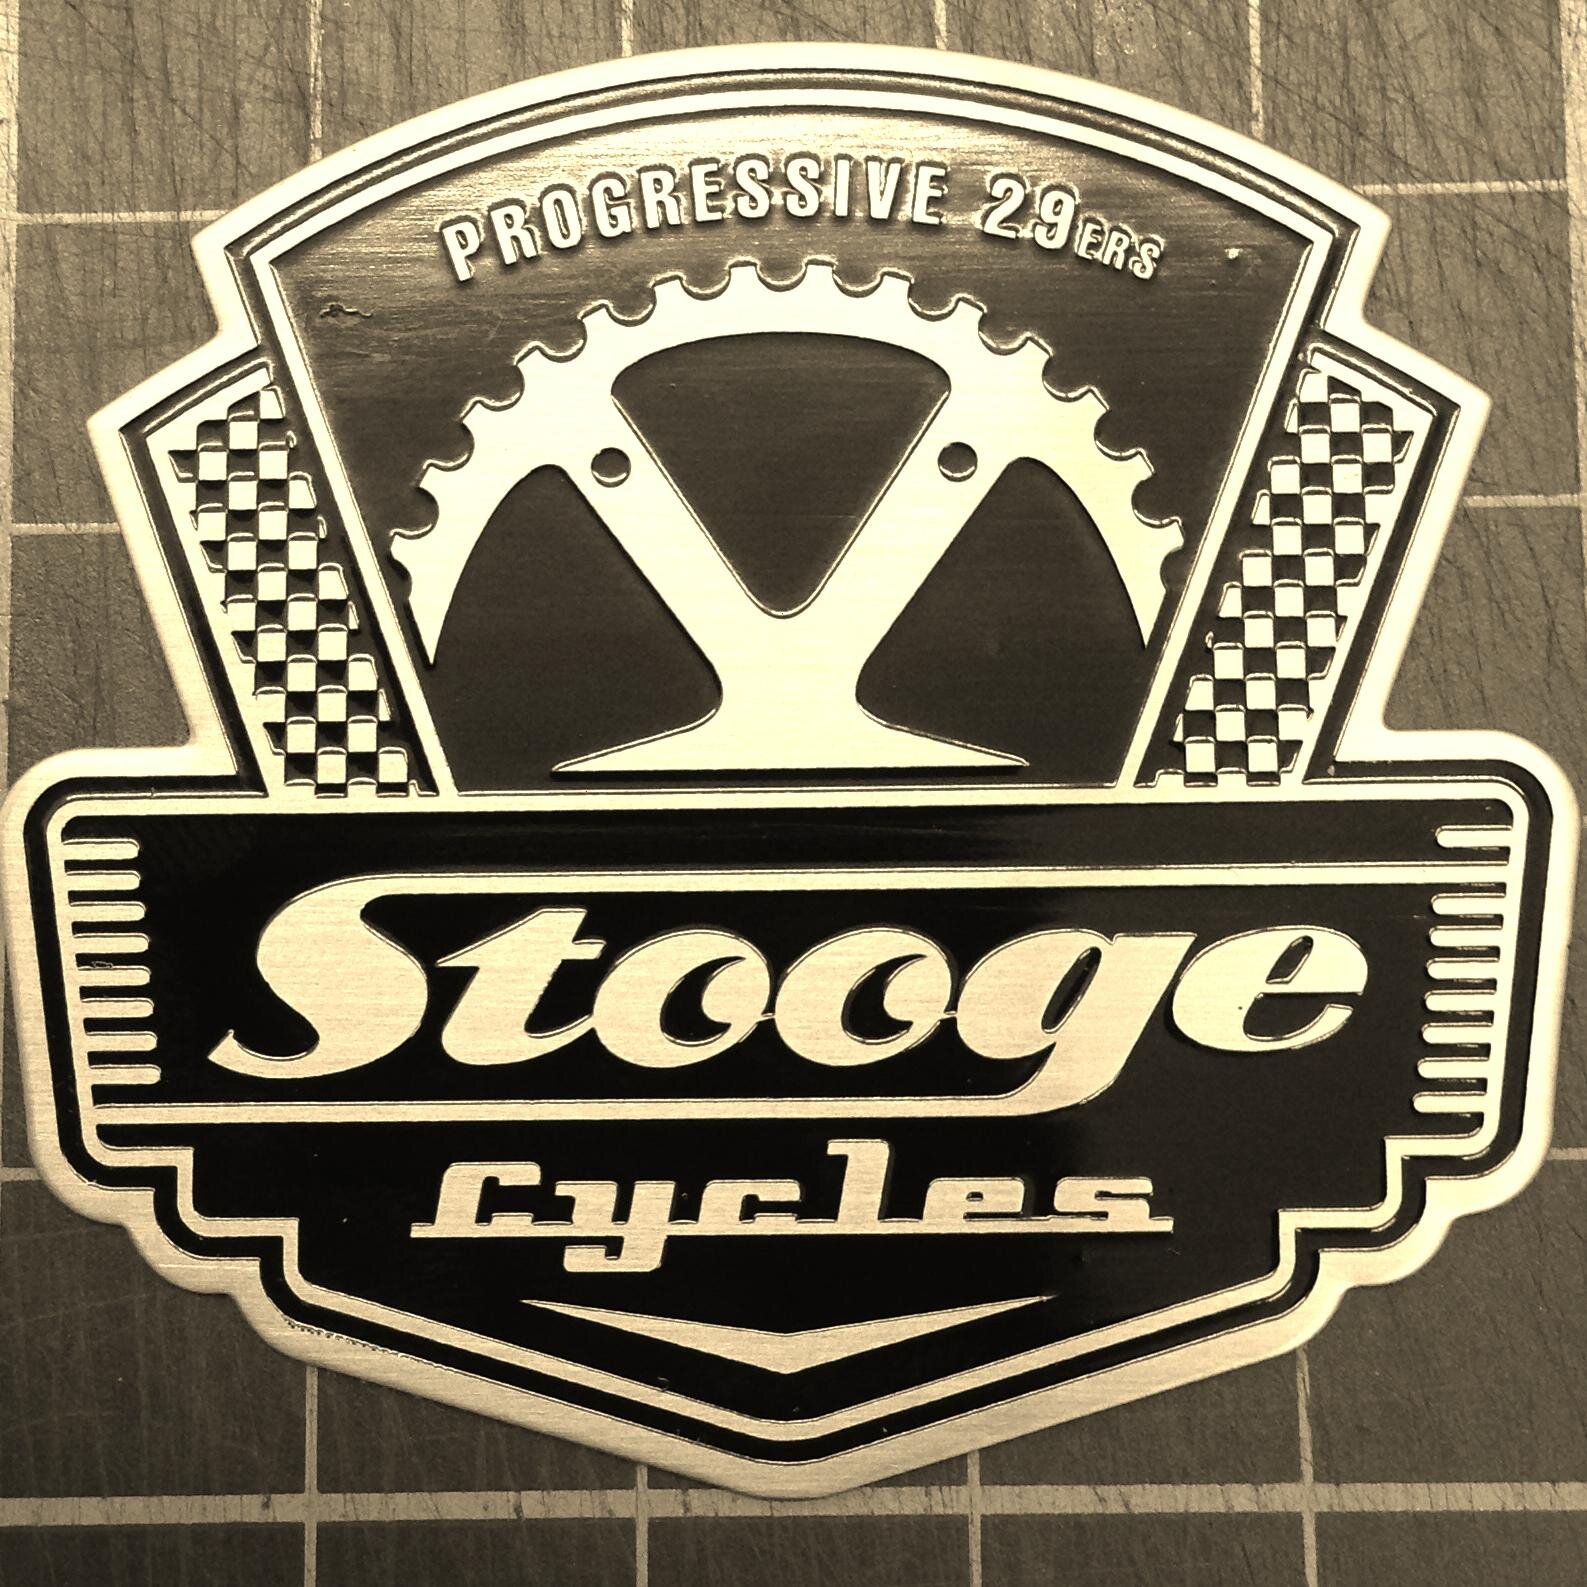 Progressive steel mountain bikes from Oswestry, Shropshire. Stooge Cycles, the best garage brand in the world....ever.